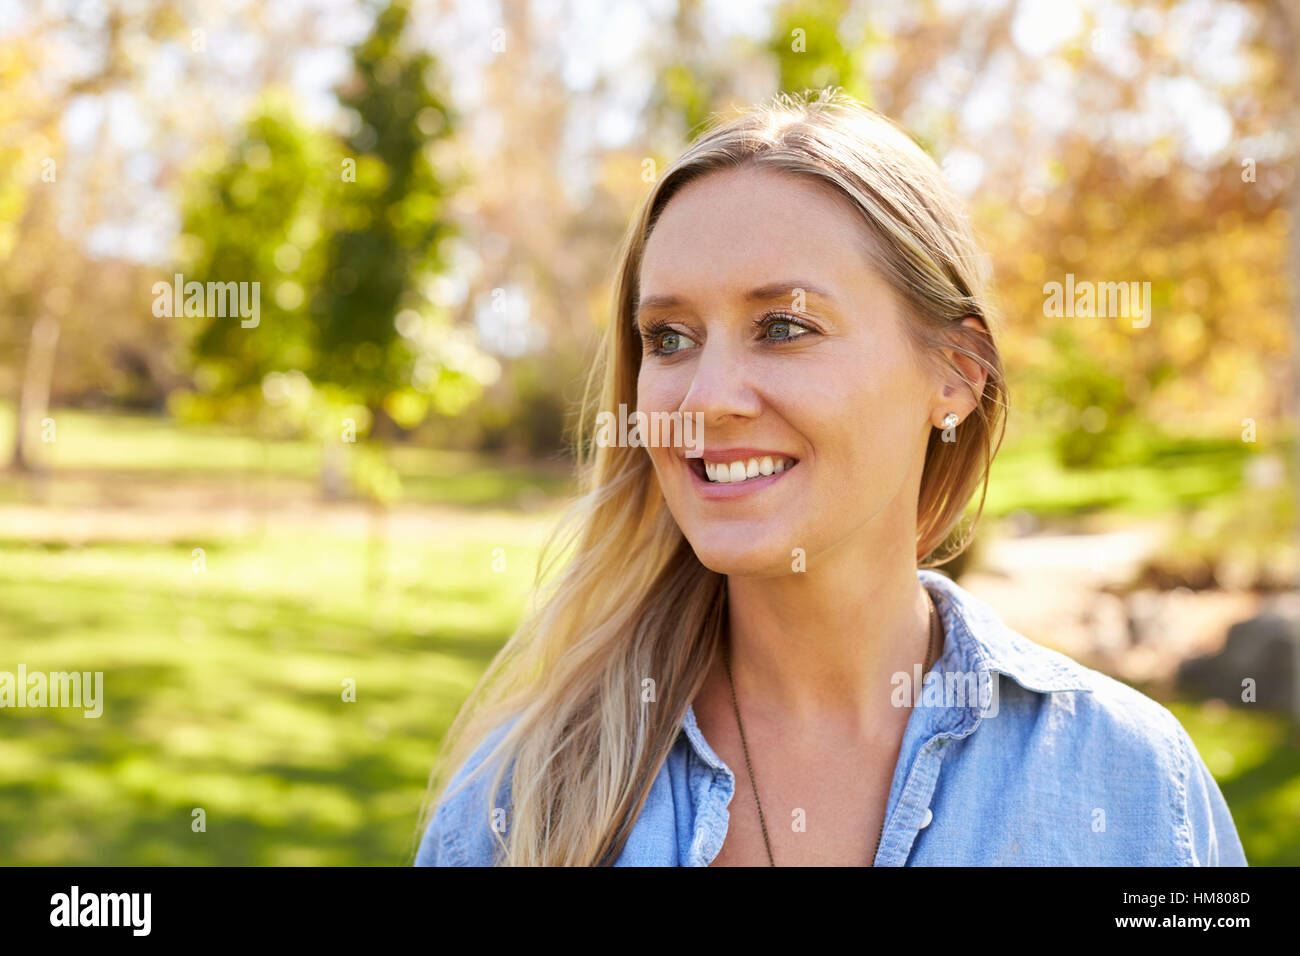 Mid thirties white woman looking away from camera in park Stock Photo